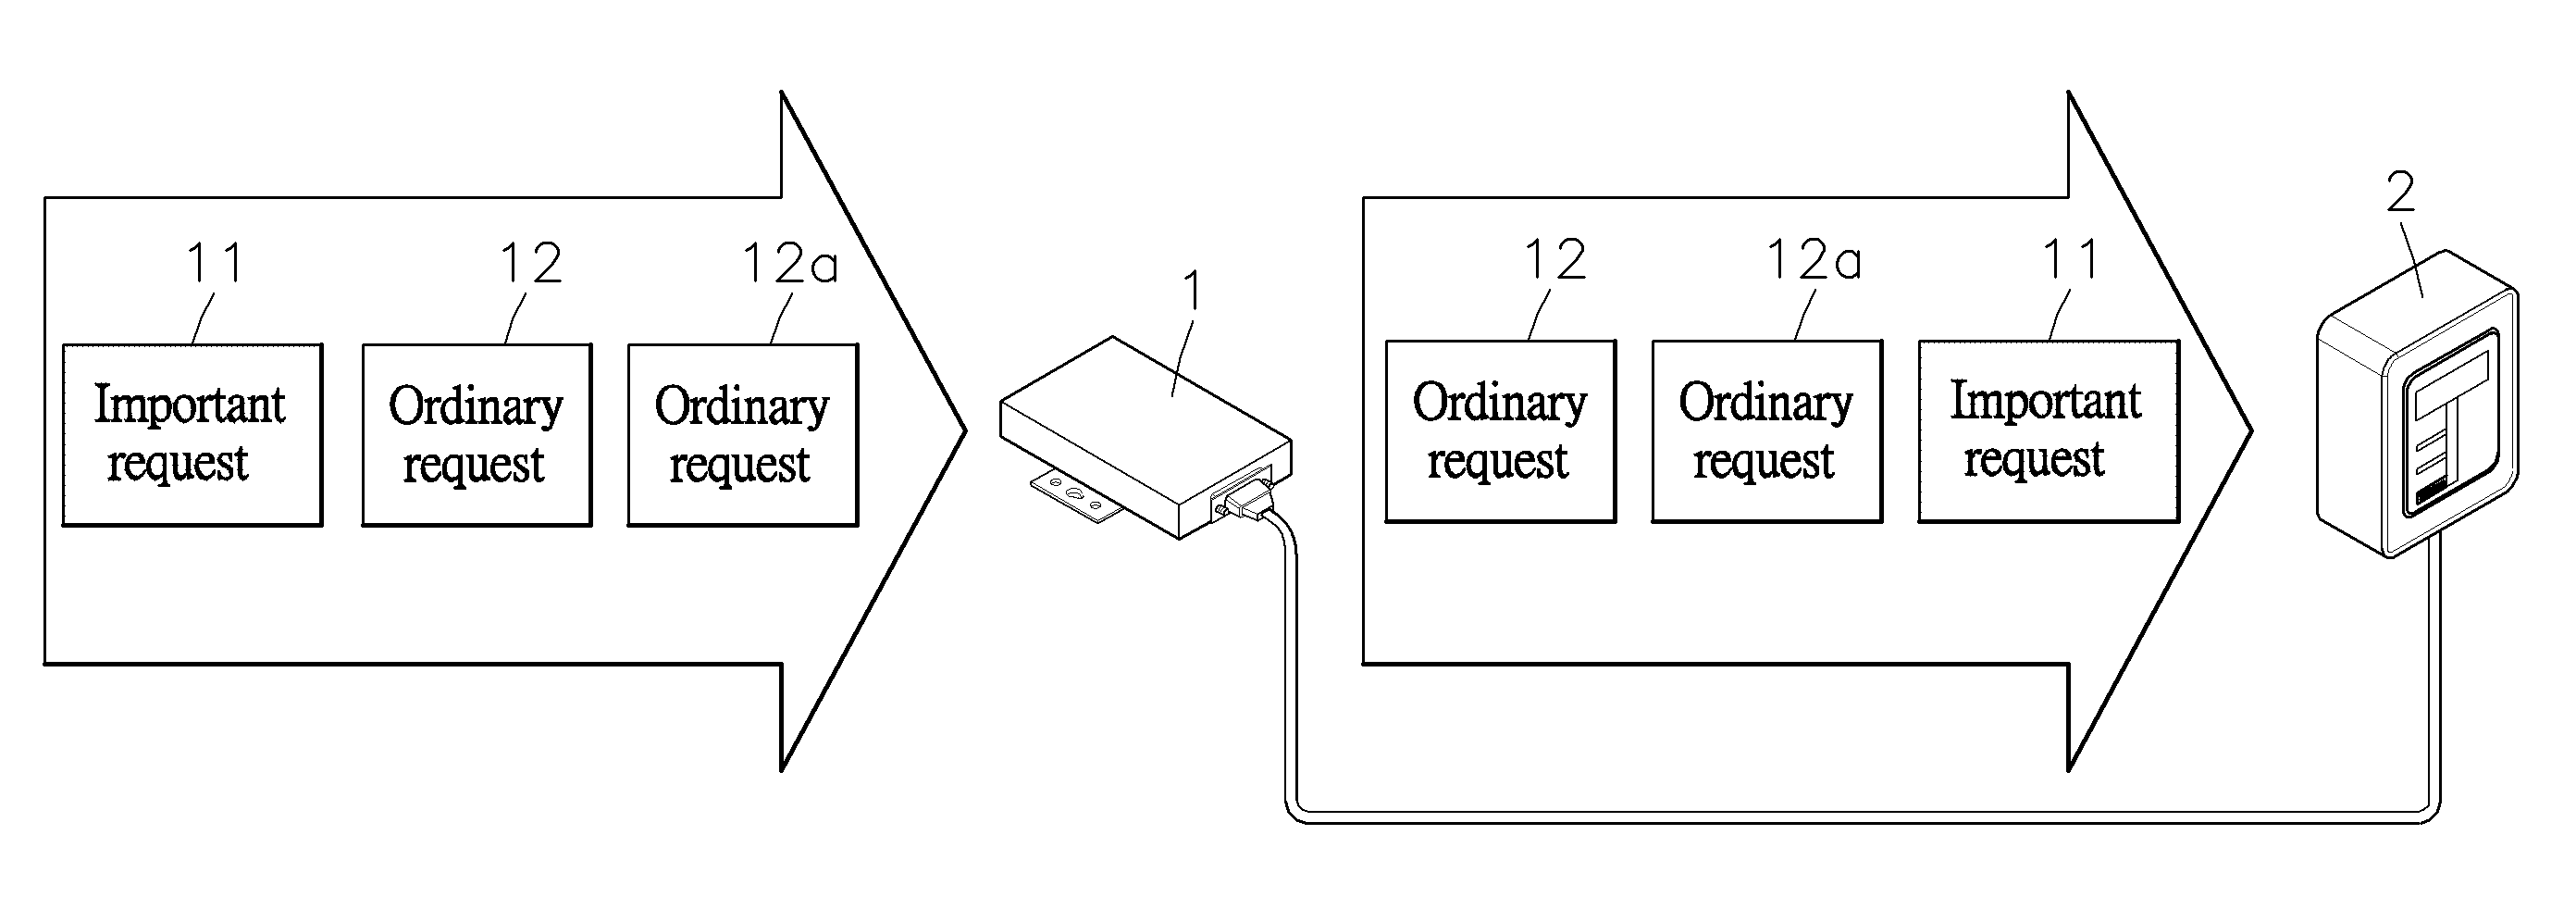 Method of determining request transmission priority subject to request content and transmitting request subject to such request transmission priority in application of Fieldbus communication framework